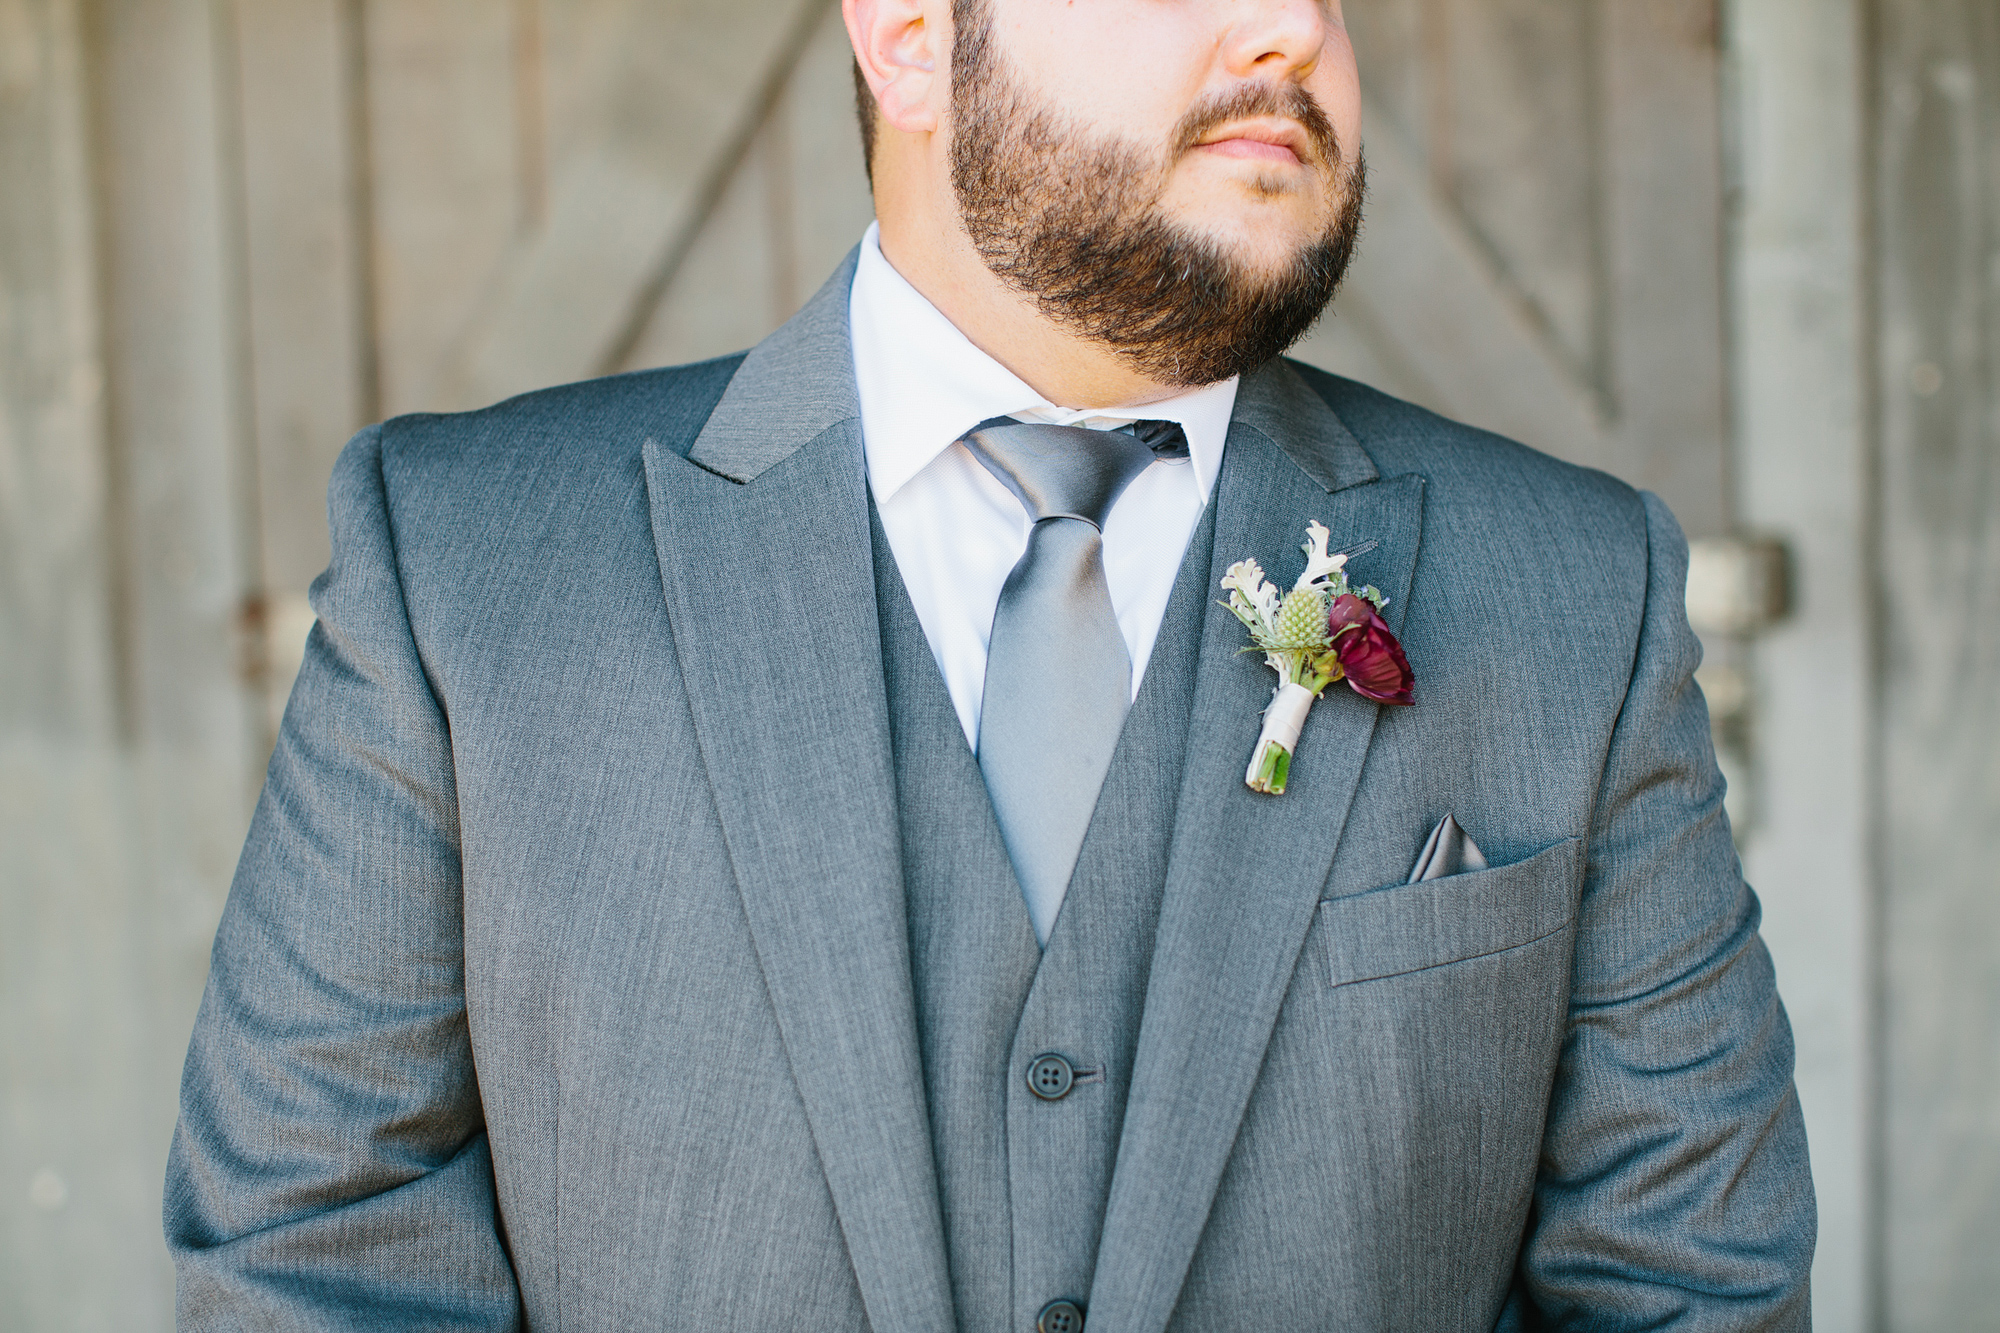 A close up of the groom